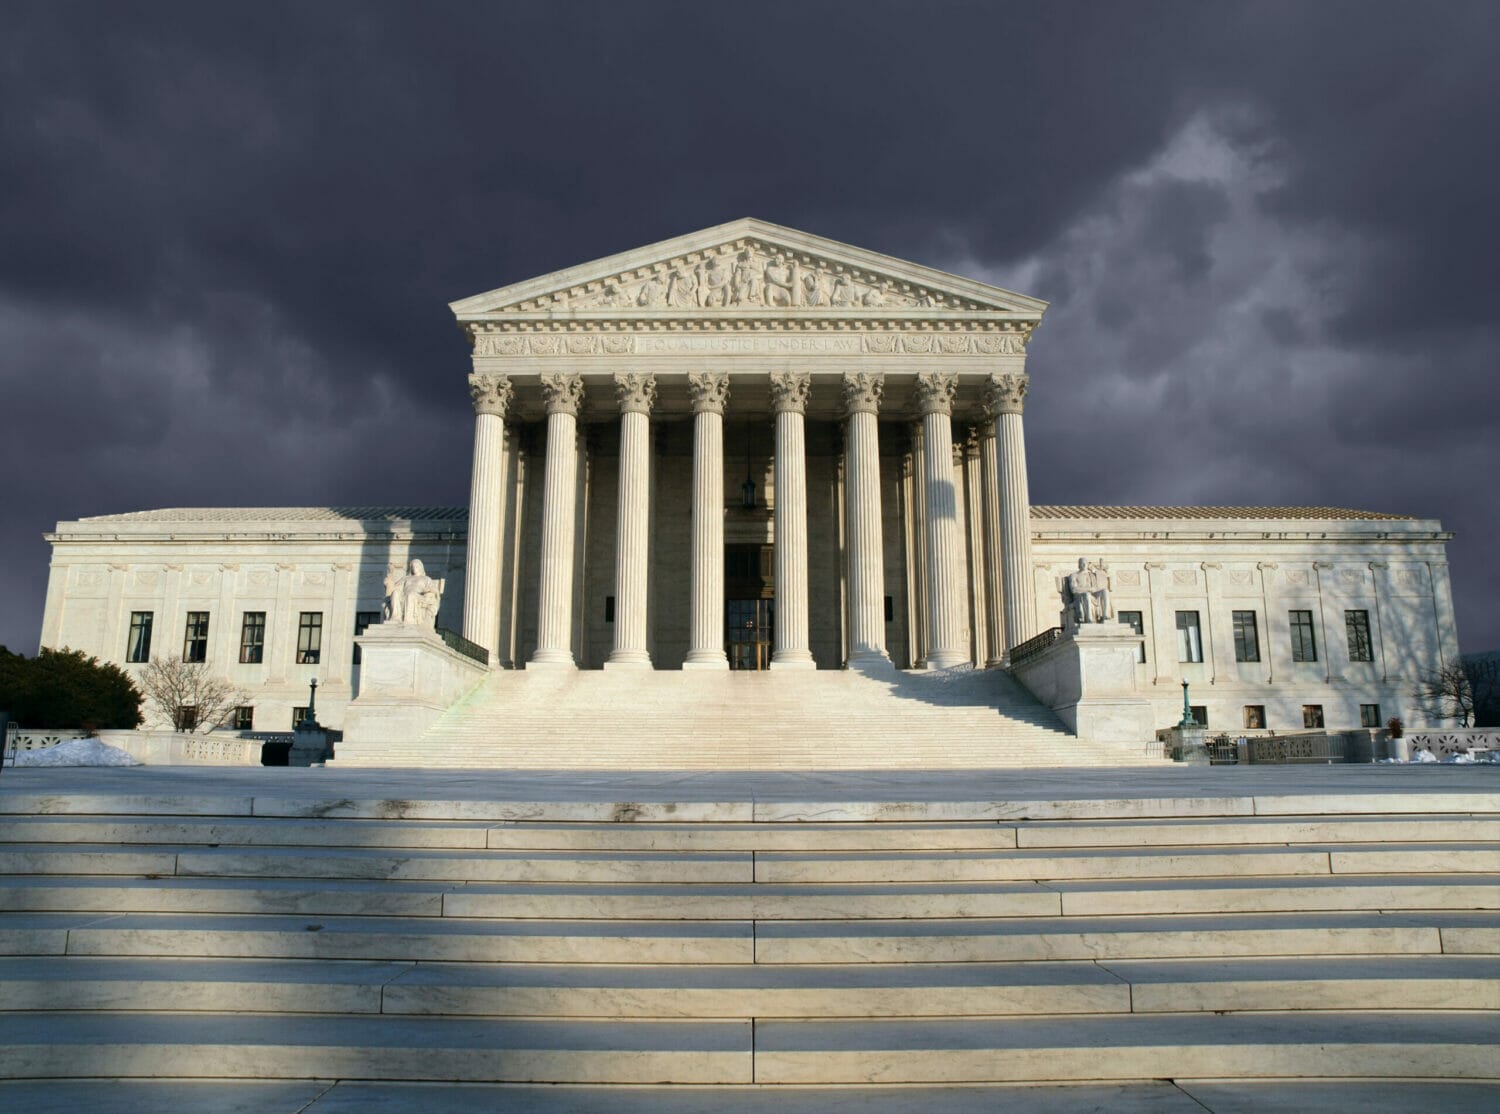 Straight-on view of the U.S. Supreme Court, somewhat lit in the foreground with ominous storm clouds gathering behind.